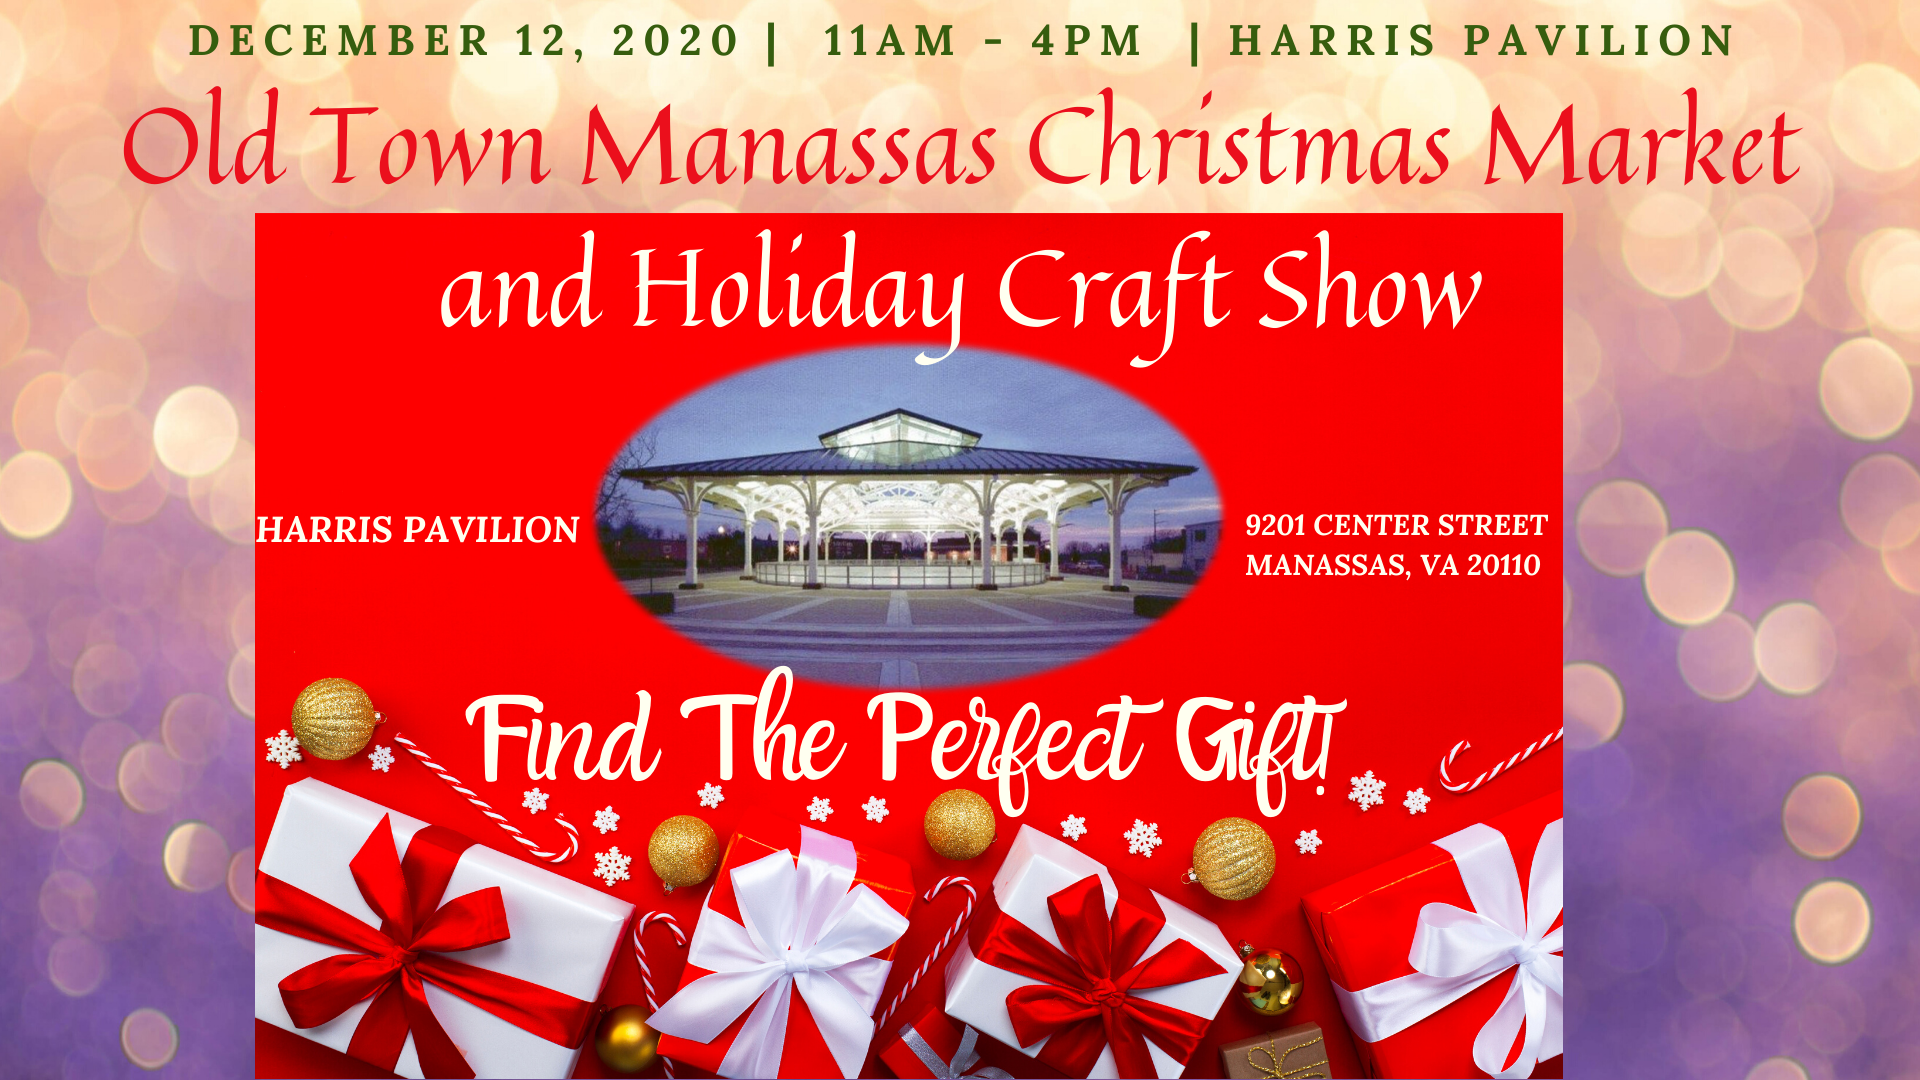 Old Town Manassas Christmas Market and Holiday Craft Fair